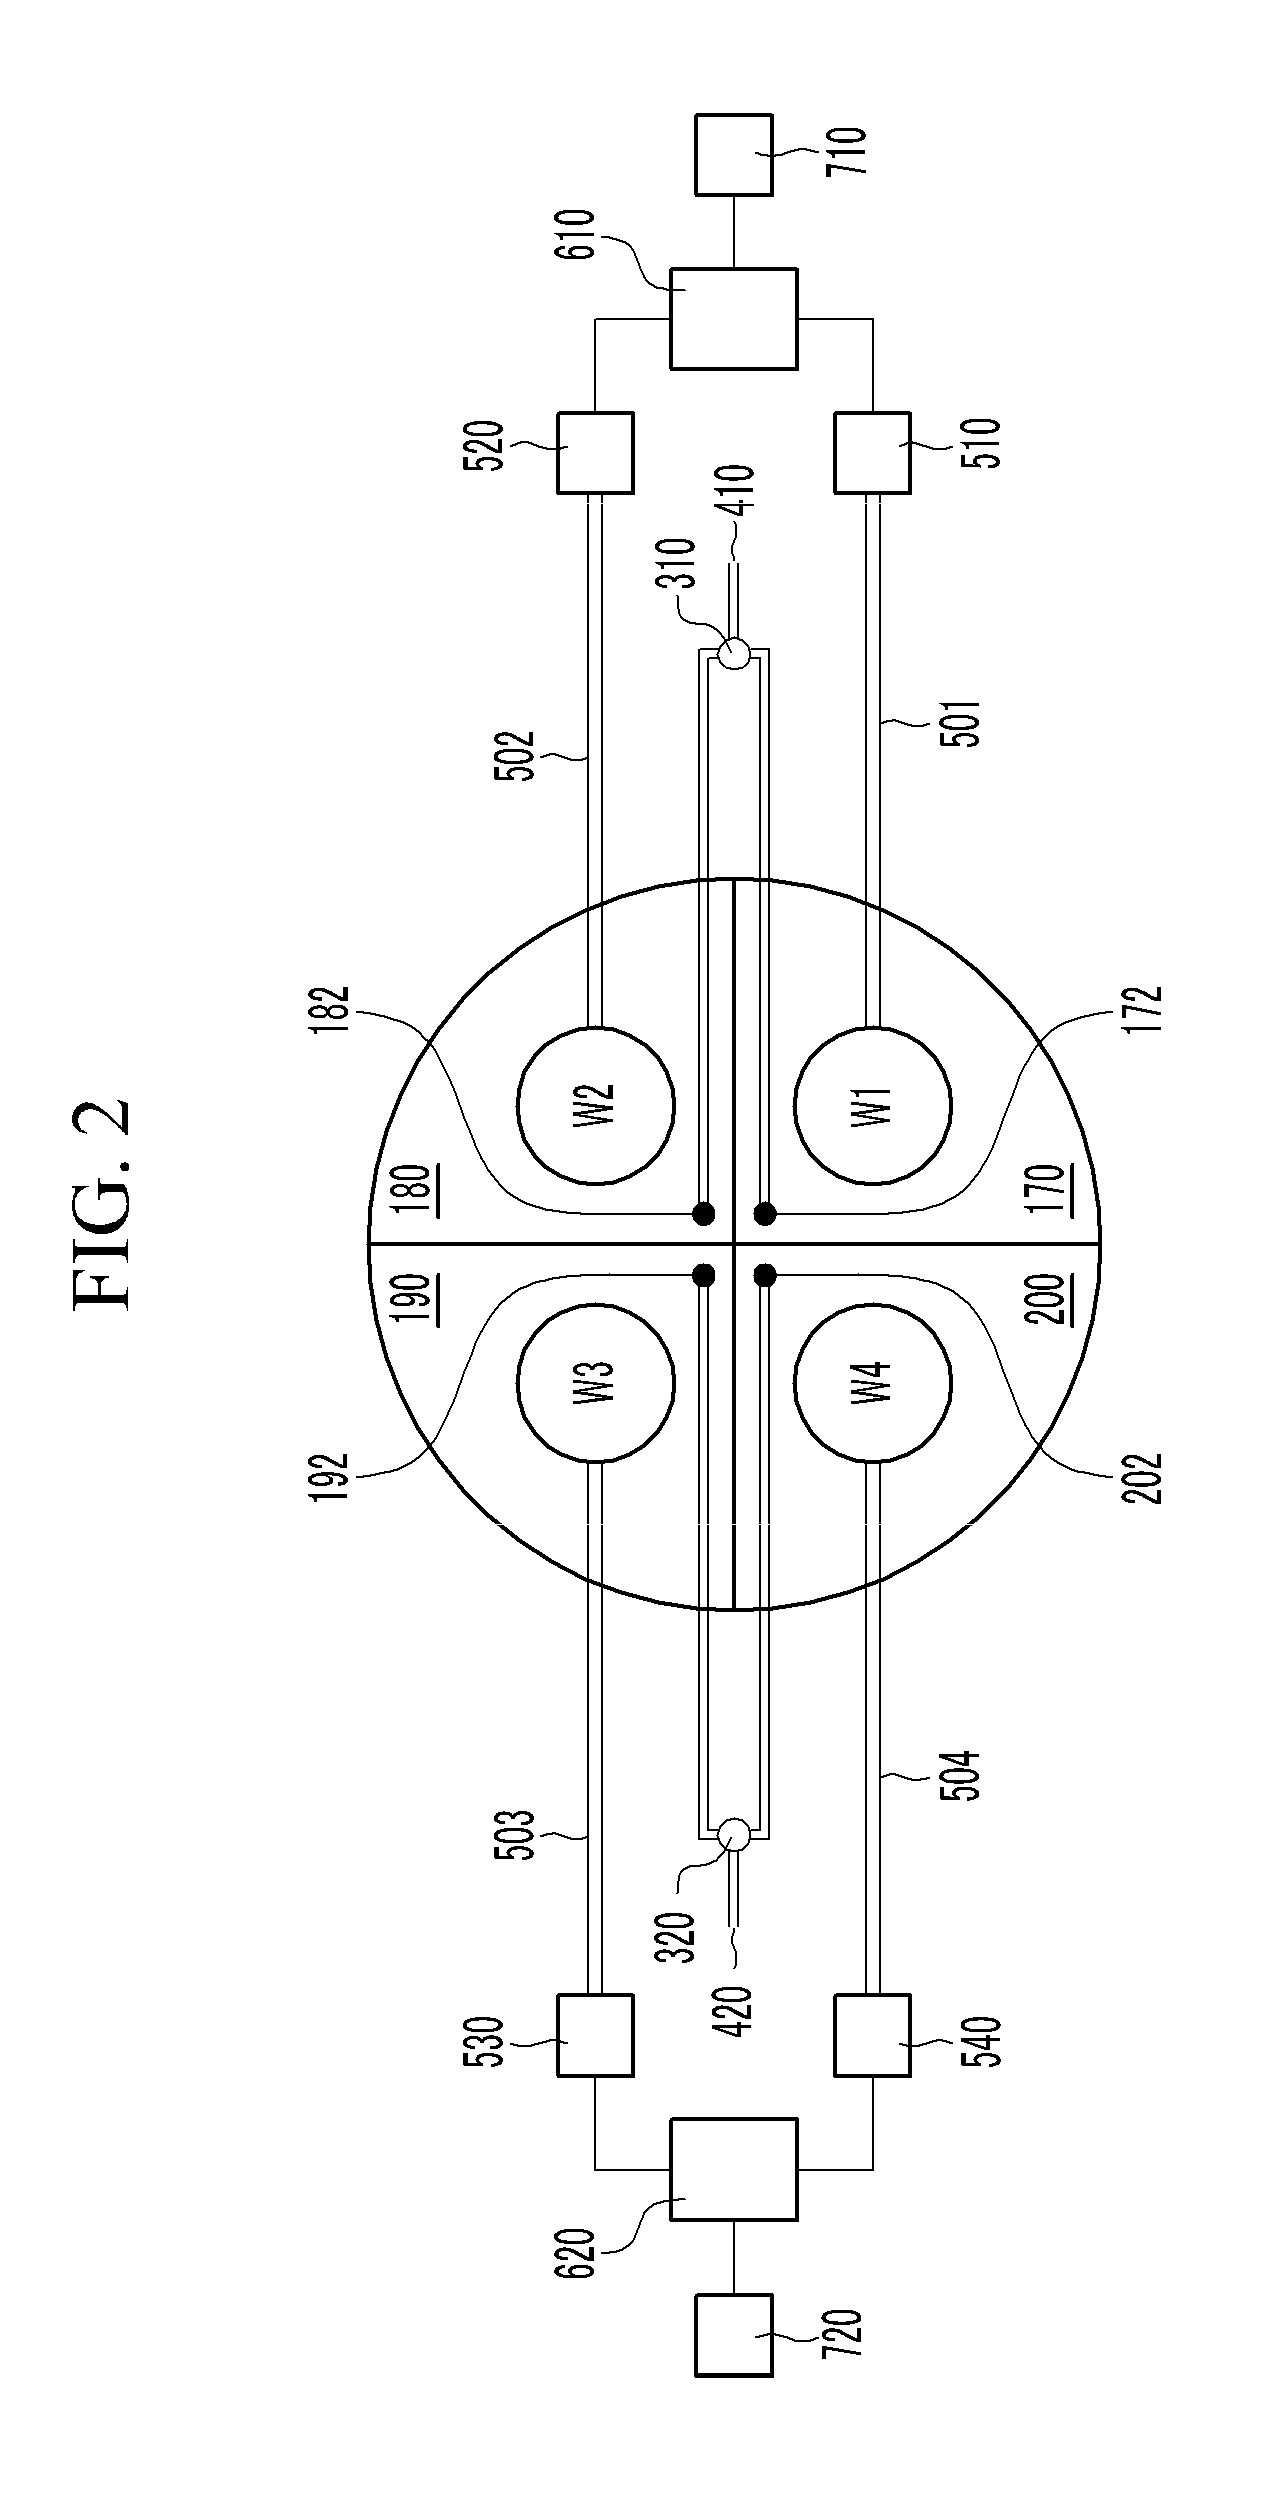 Plasma processing member, deposition apparatus including the same, and depositing method using the same